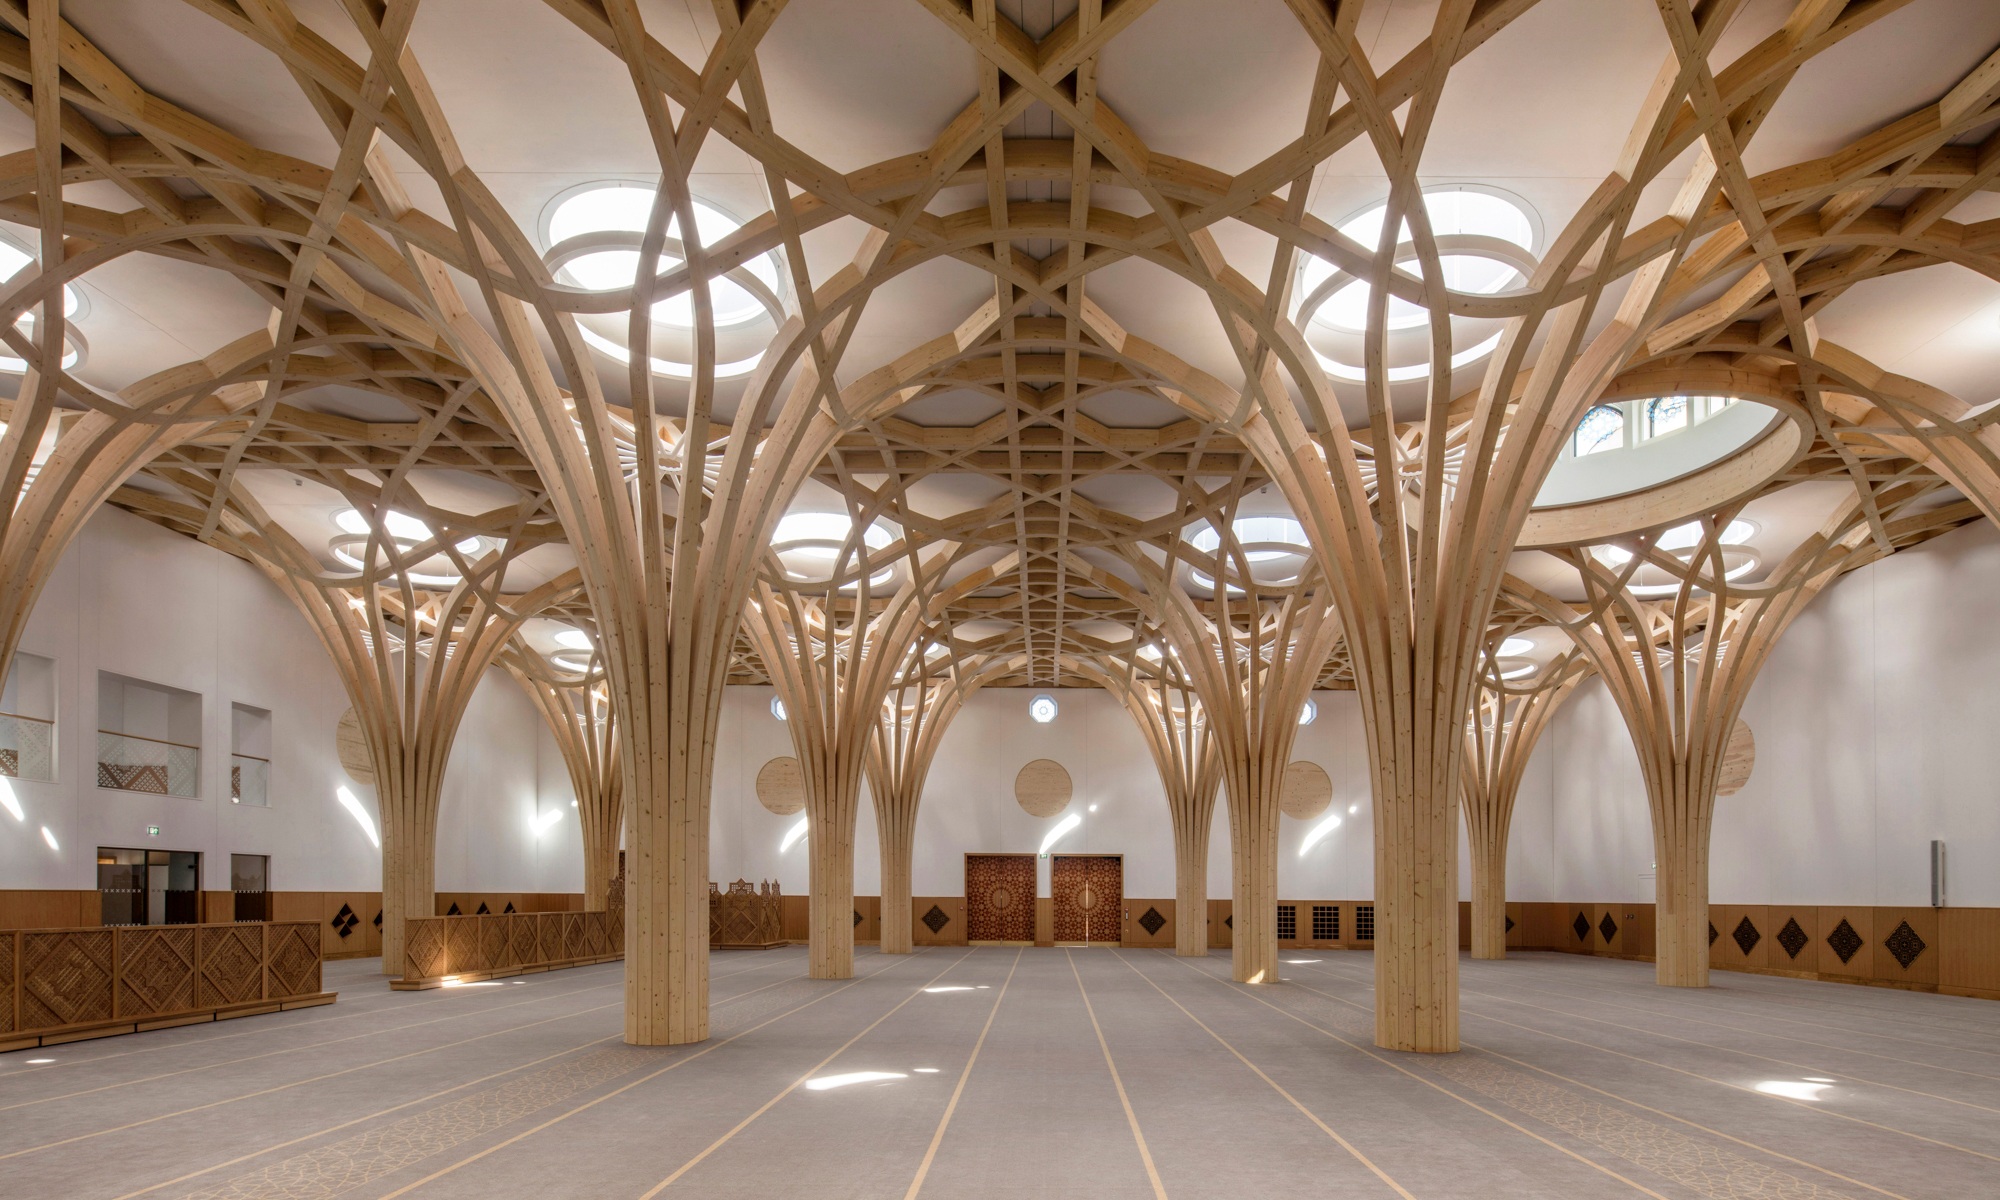 Tree-like timber support structure and oriental timber elements on the walls and doors inside the Cambridge Mosque.